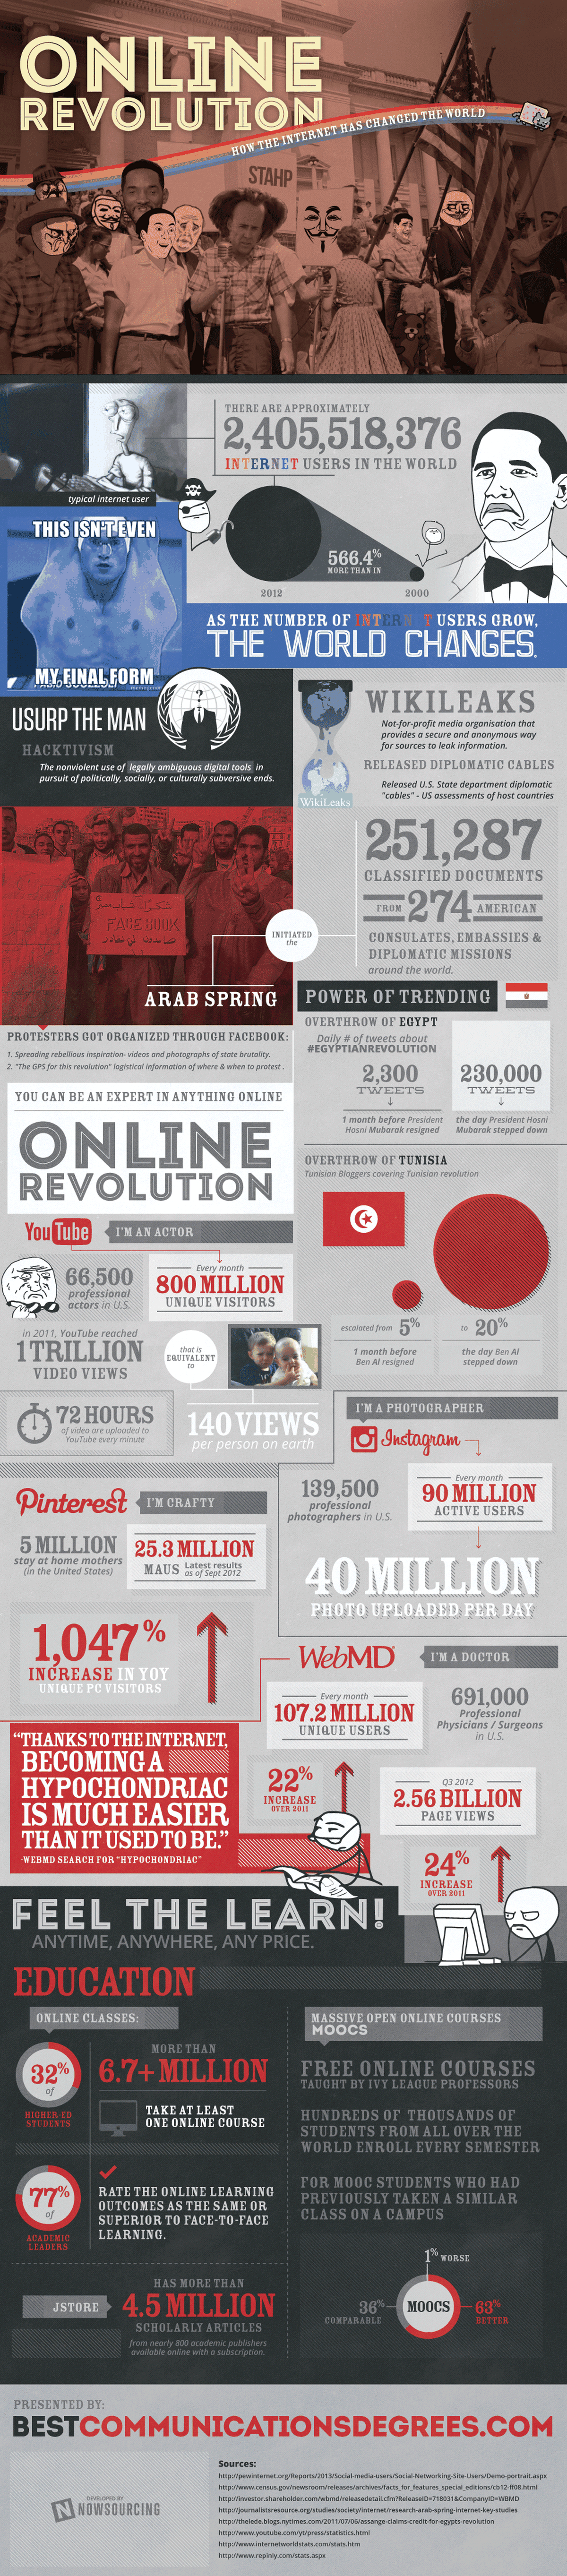 Infographic: Online Revolution: How the Internet Has Changed the World